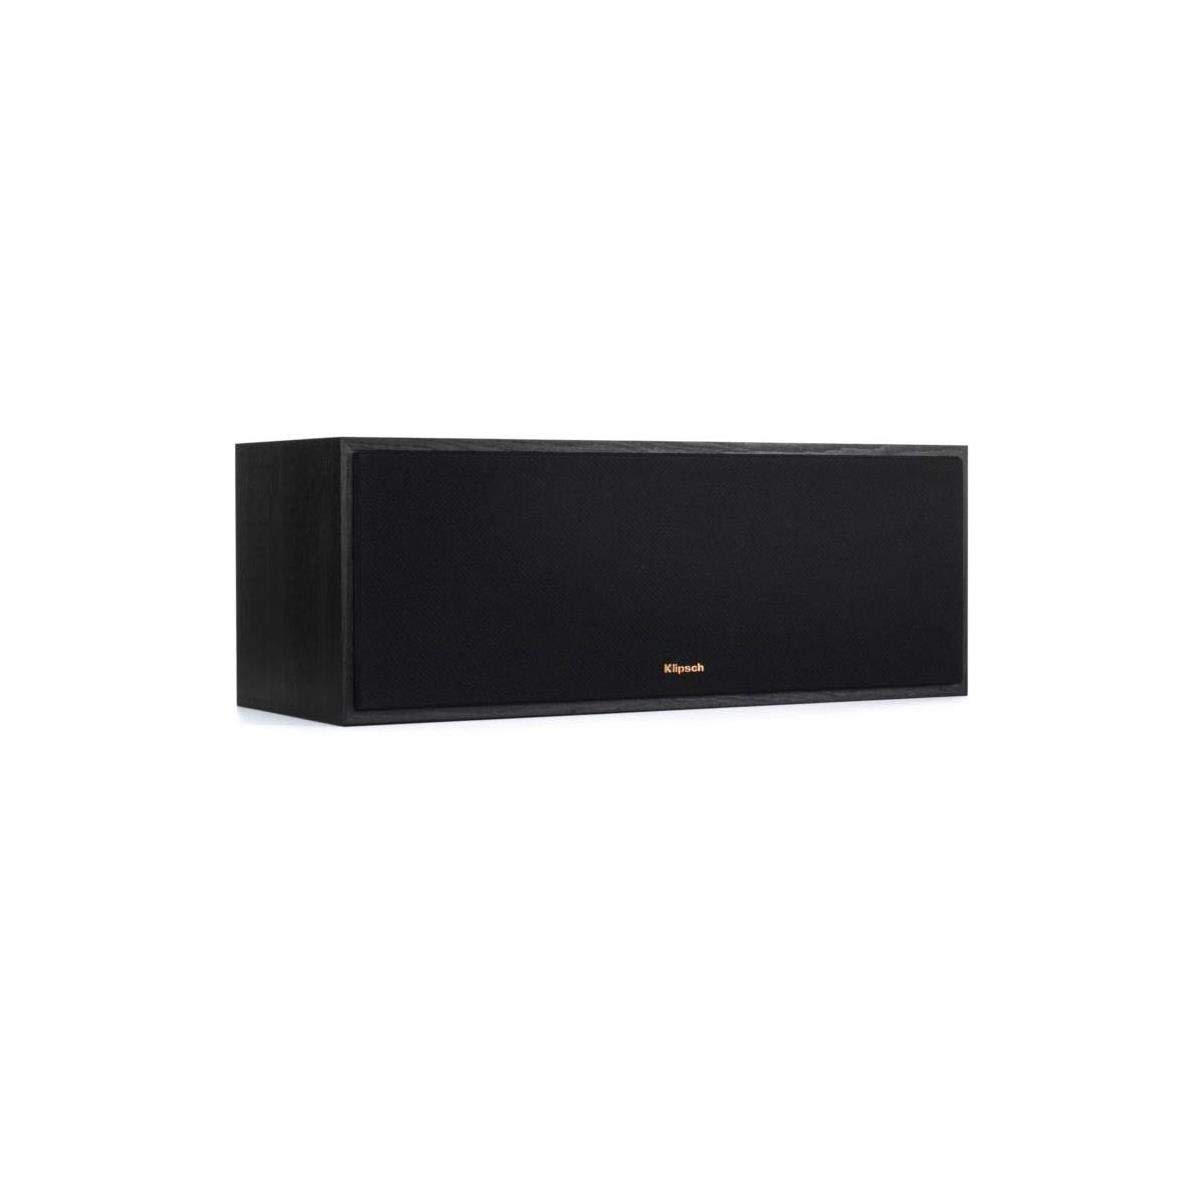 Klipsch Reference 5.1 Home Theater System with 2X R-625FA Dolby Atmos Floorstanding Speaker, R-12SW 12; 400W Powered Subwoofer, R-52C Two-Way Center Channel, R-41M Bookshelf Speakers (Pair), Black